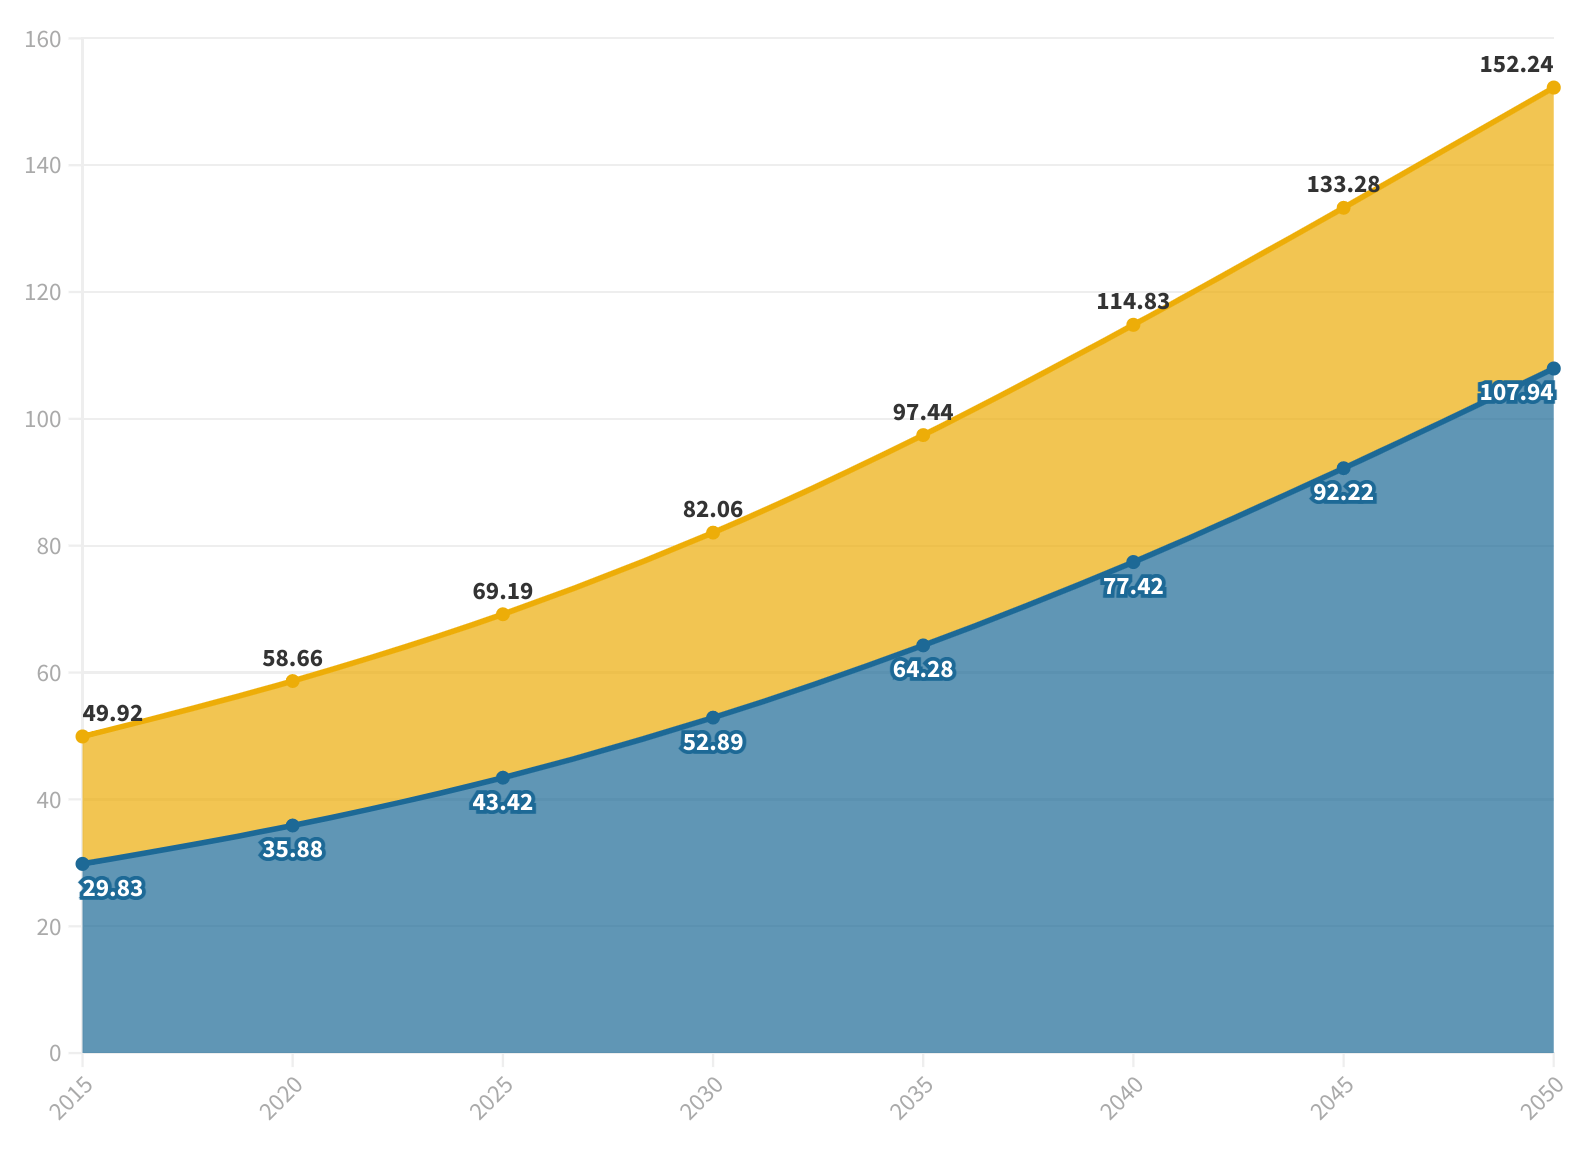 Line graph of estimated number of people with dementia over time and separated by income group, showing an ever increasing trend reaching 152 million people in 2050